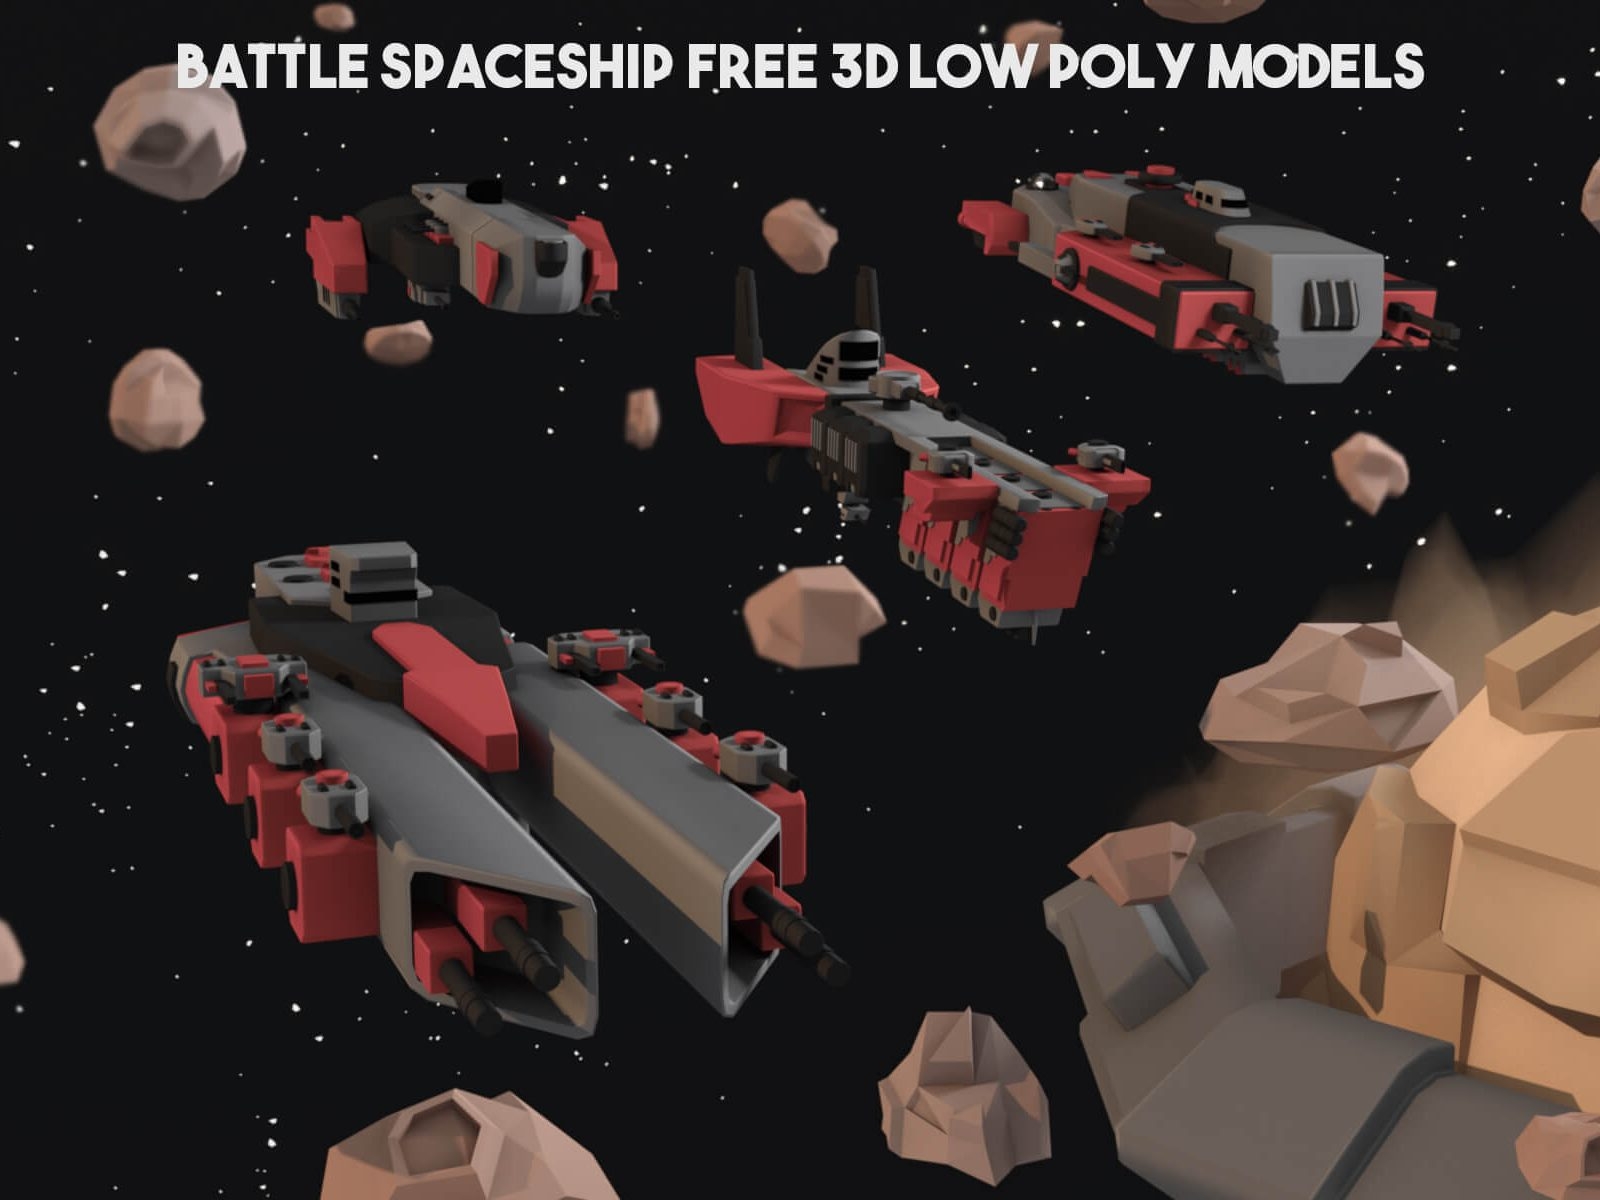 Free Low Poly 3D Game Assets on Behance